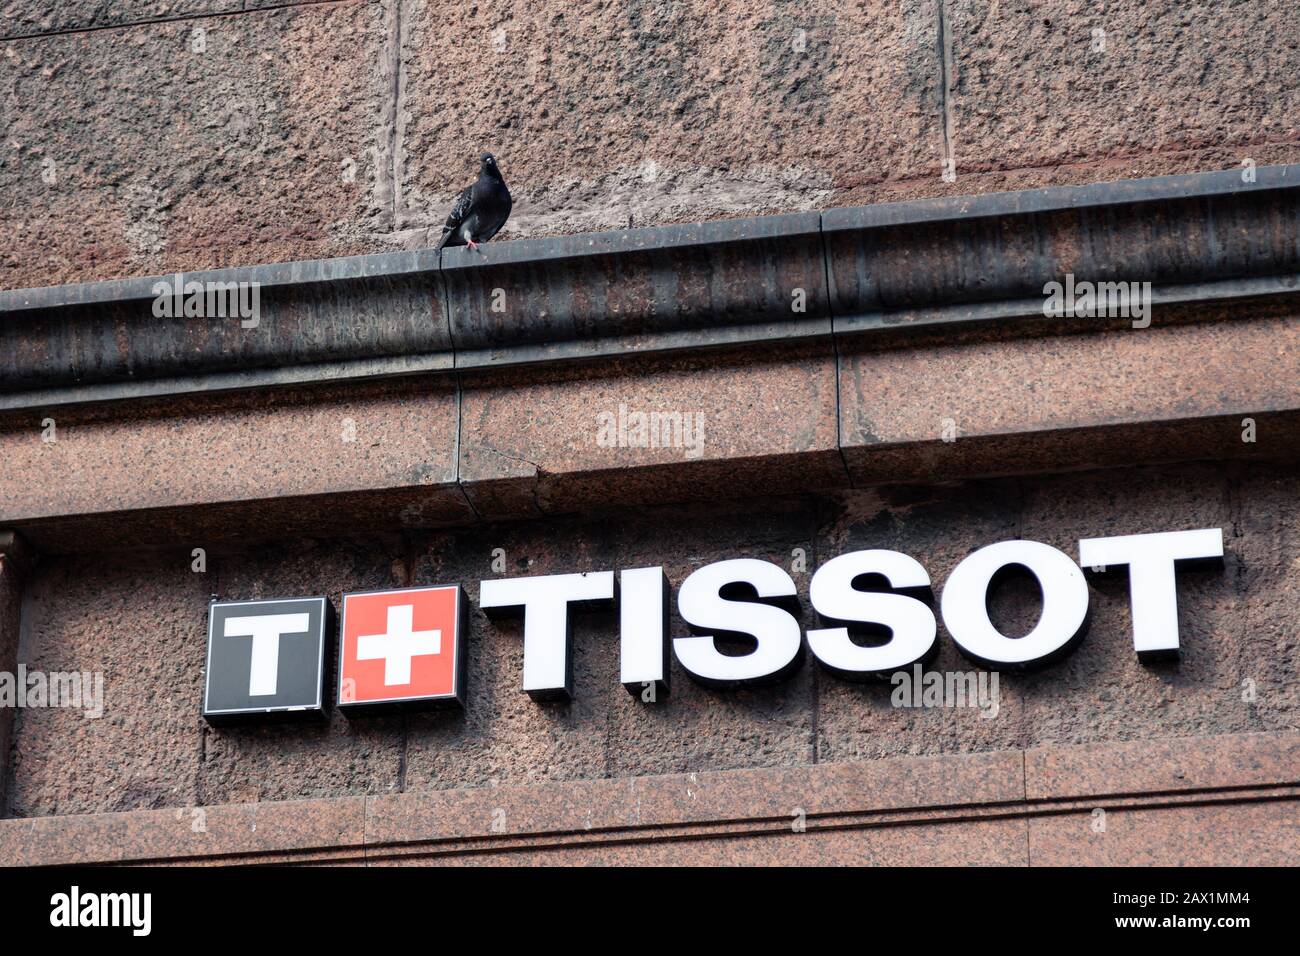 Russia Moscow 2019-06-17 Tissot logo and sign on a building. Tissot is a popular and famous Swiss luxury watchmaker. Stock Photo